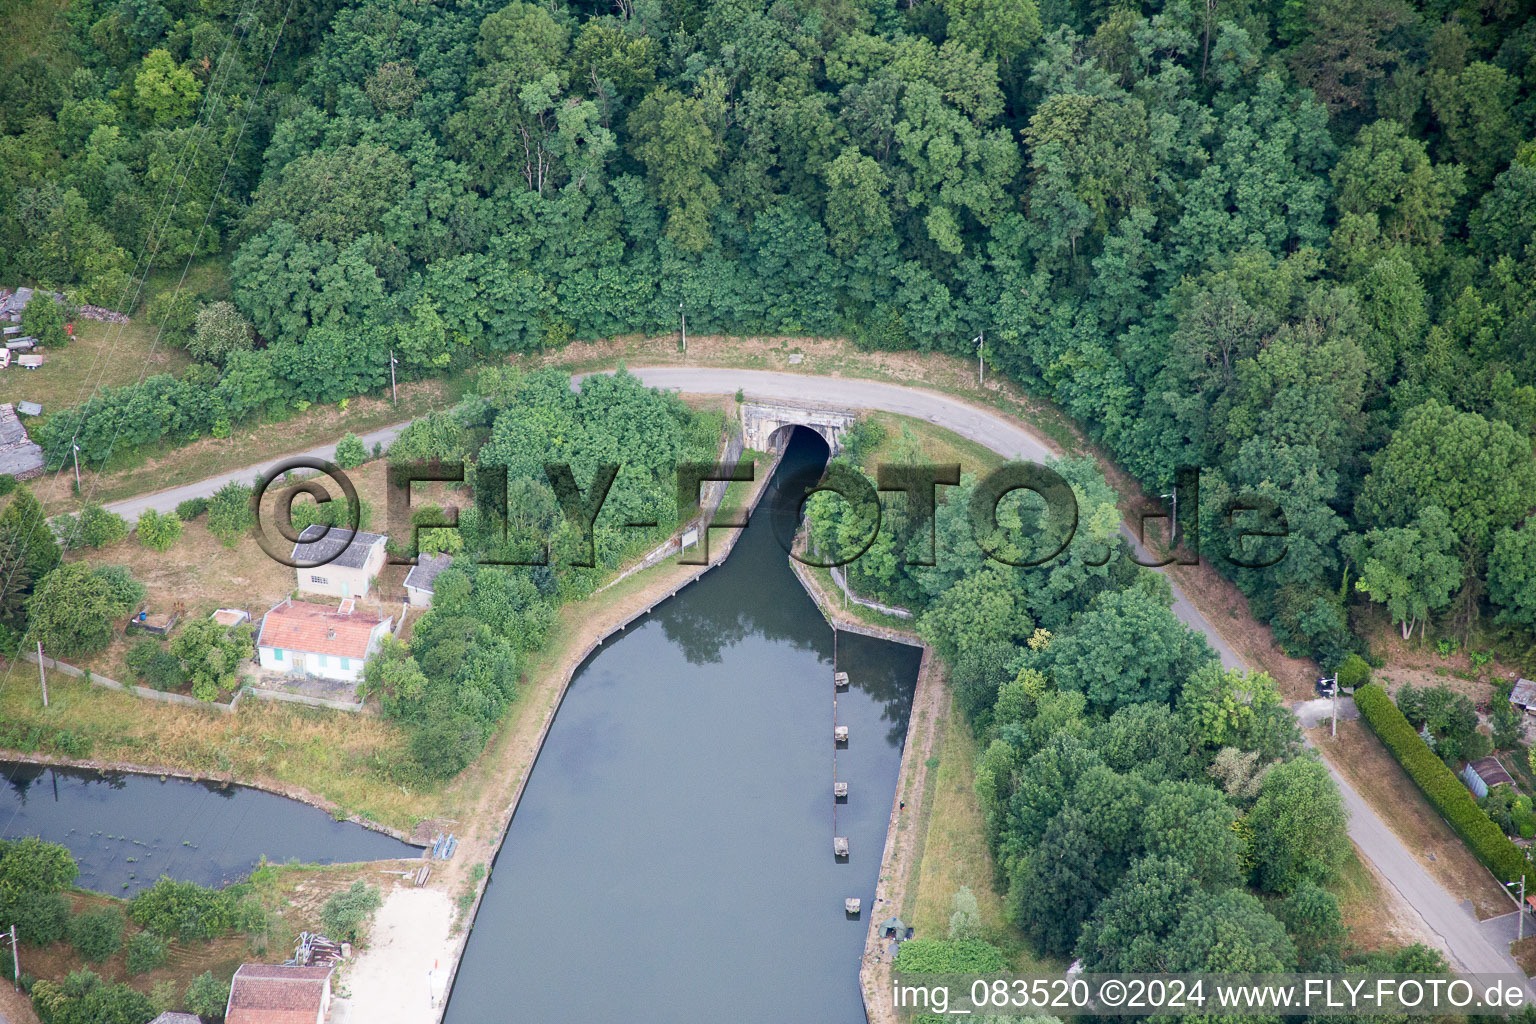 Aerial view of Channel flow through tunnel and river banks of the waterway shipping Rhine to Marne channel in Foug in Grand Est, France